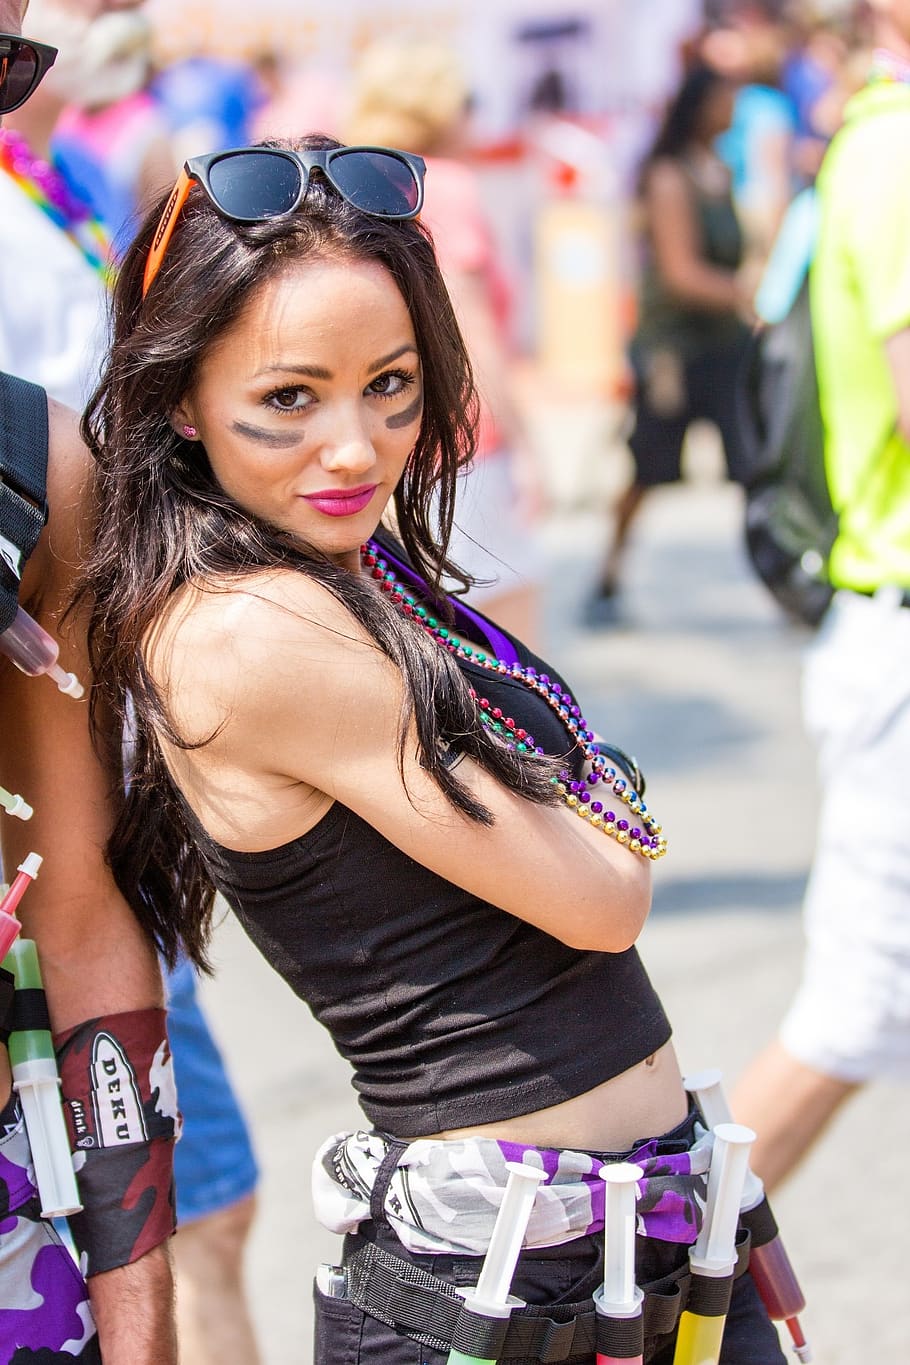 pride day, gay pride, girl, woman, young girl, people, parades, events, festivals, looking at camera